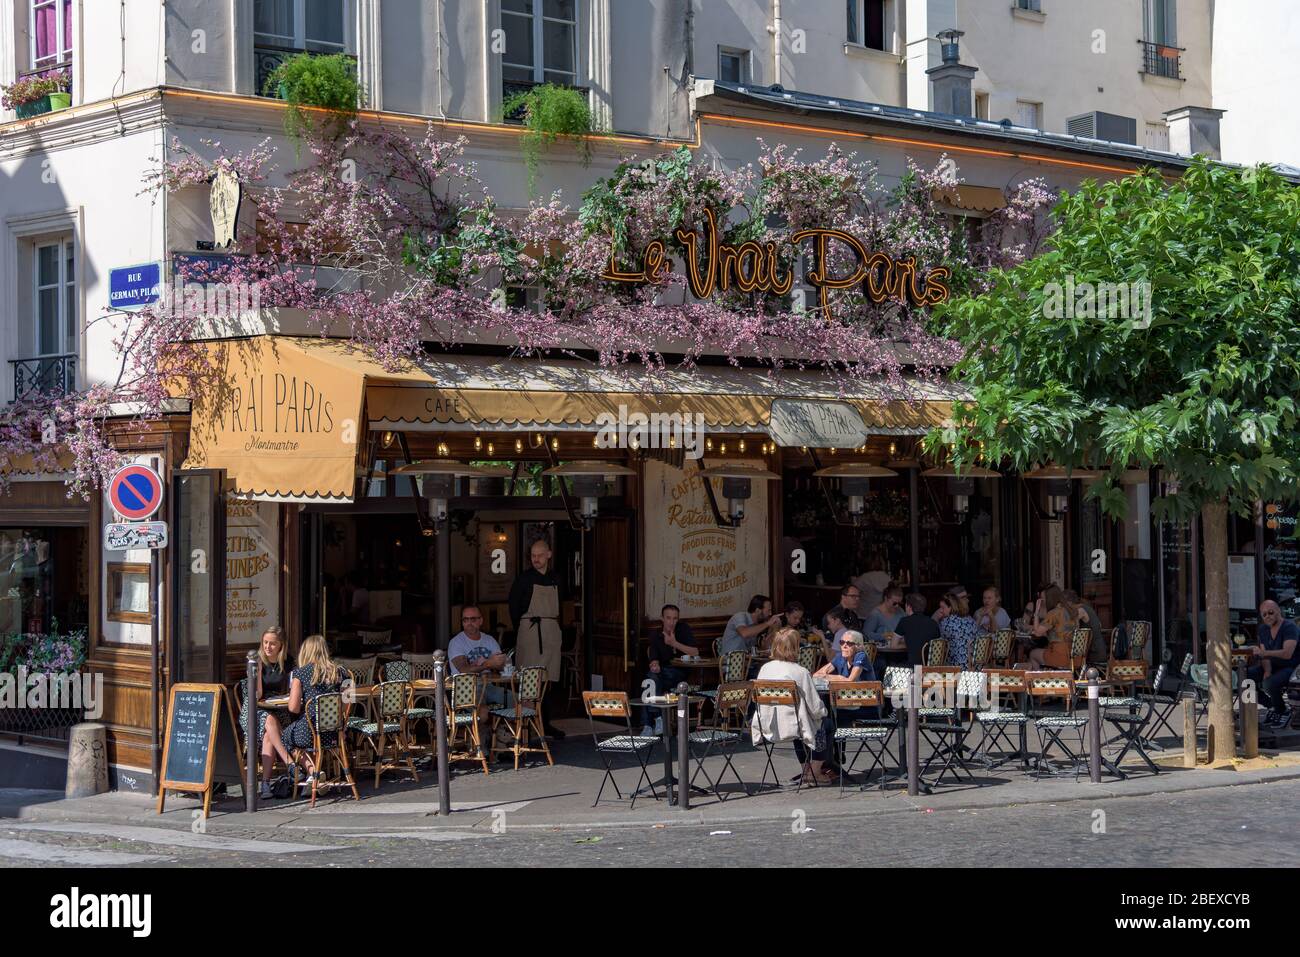 The restaurant 'Le Vrai Paris' on a typical street in the Montmartre district with crowds of tourists, near the Basilica of the Sacre Coeur in Paris. Stock Photo